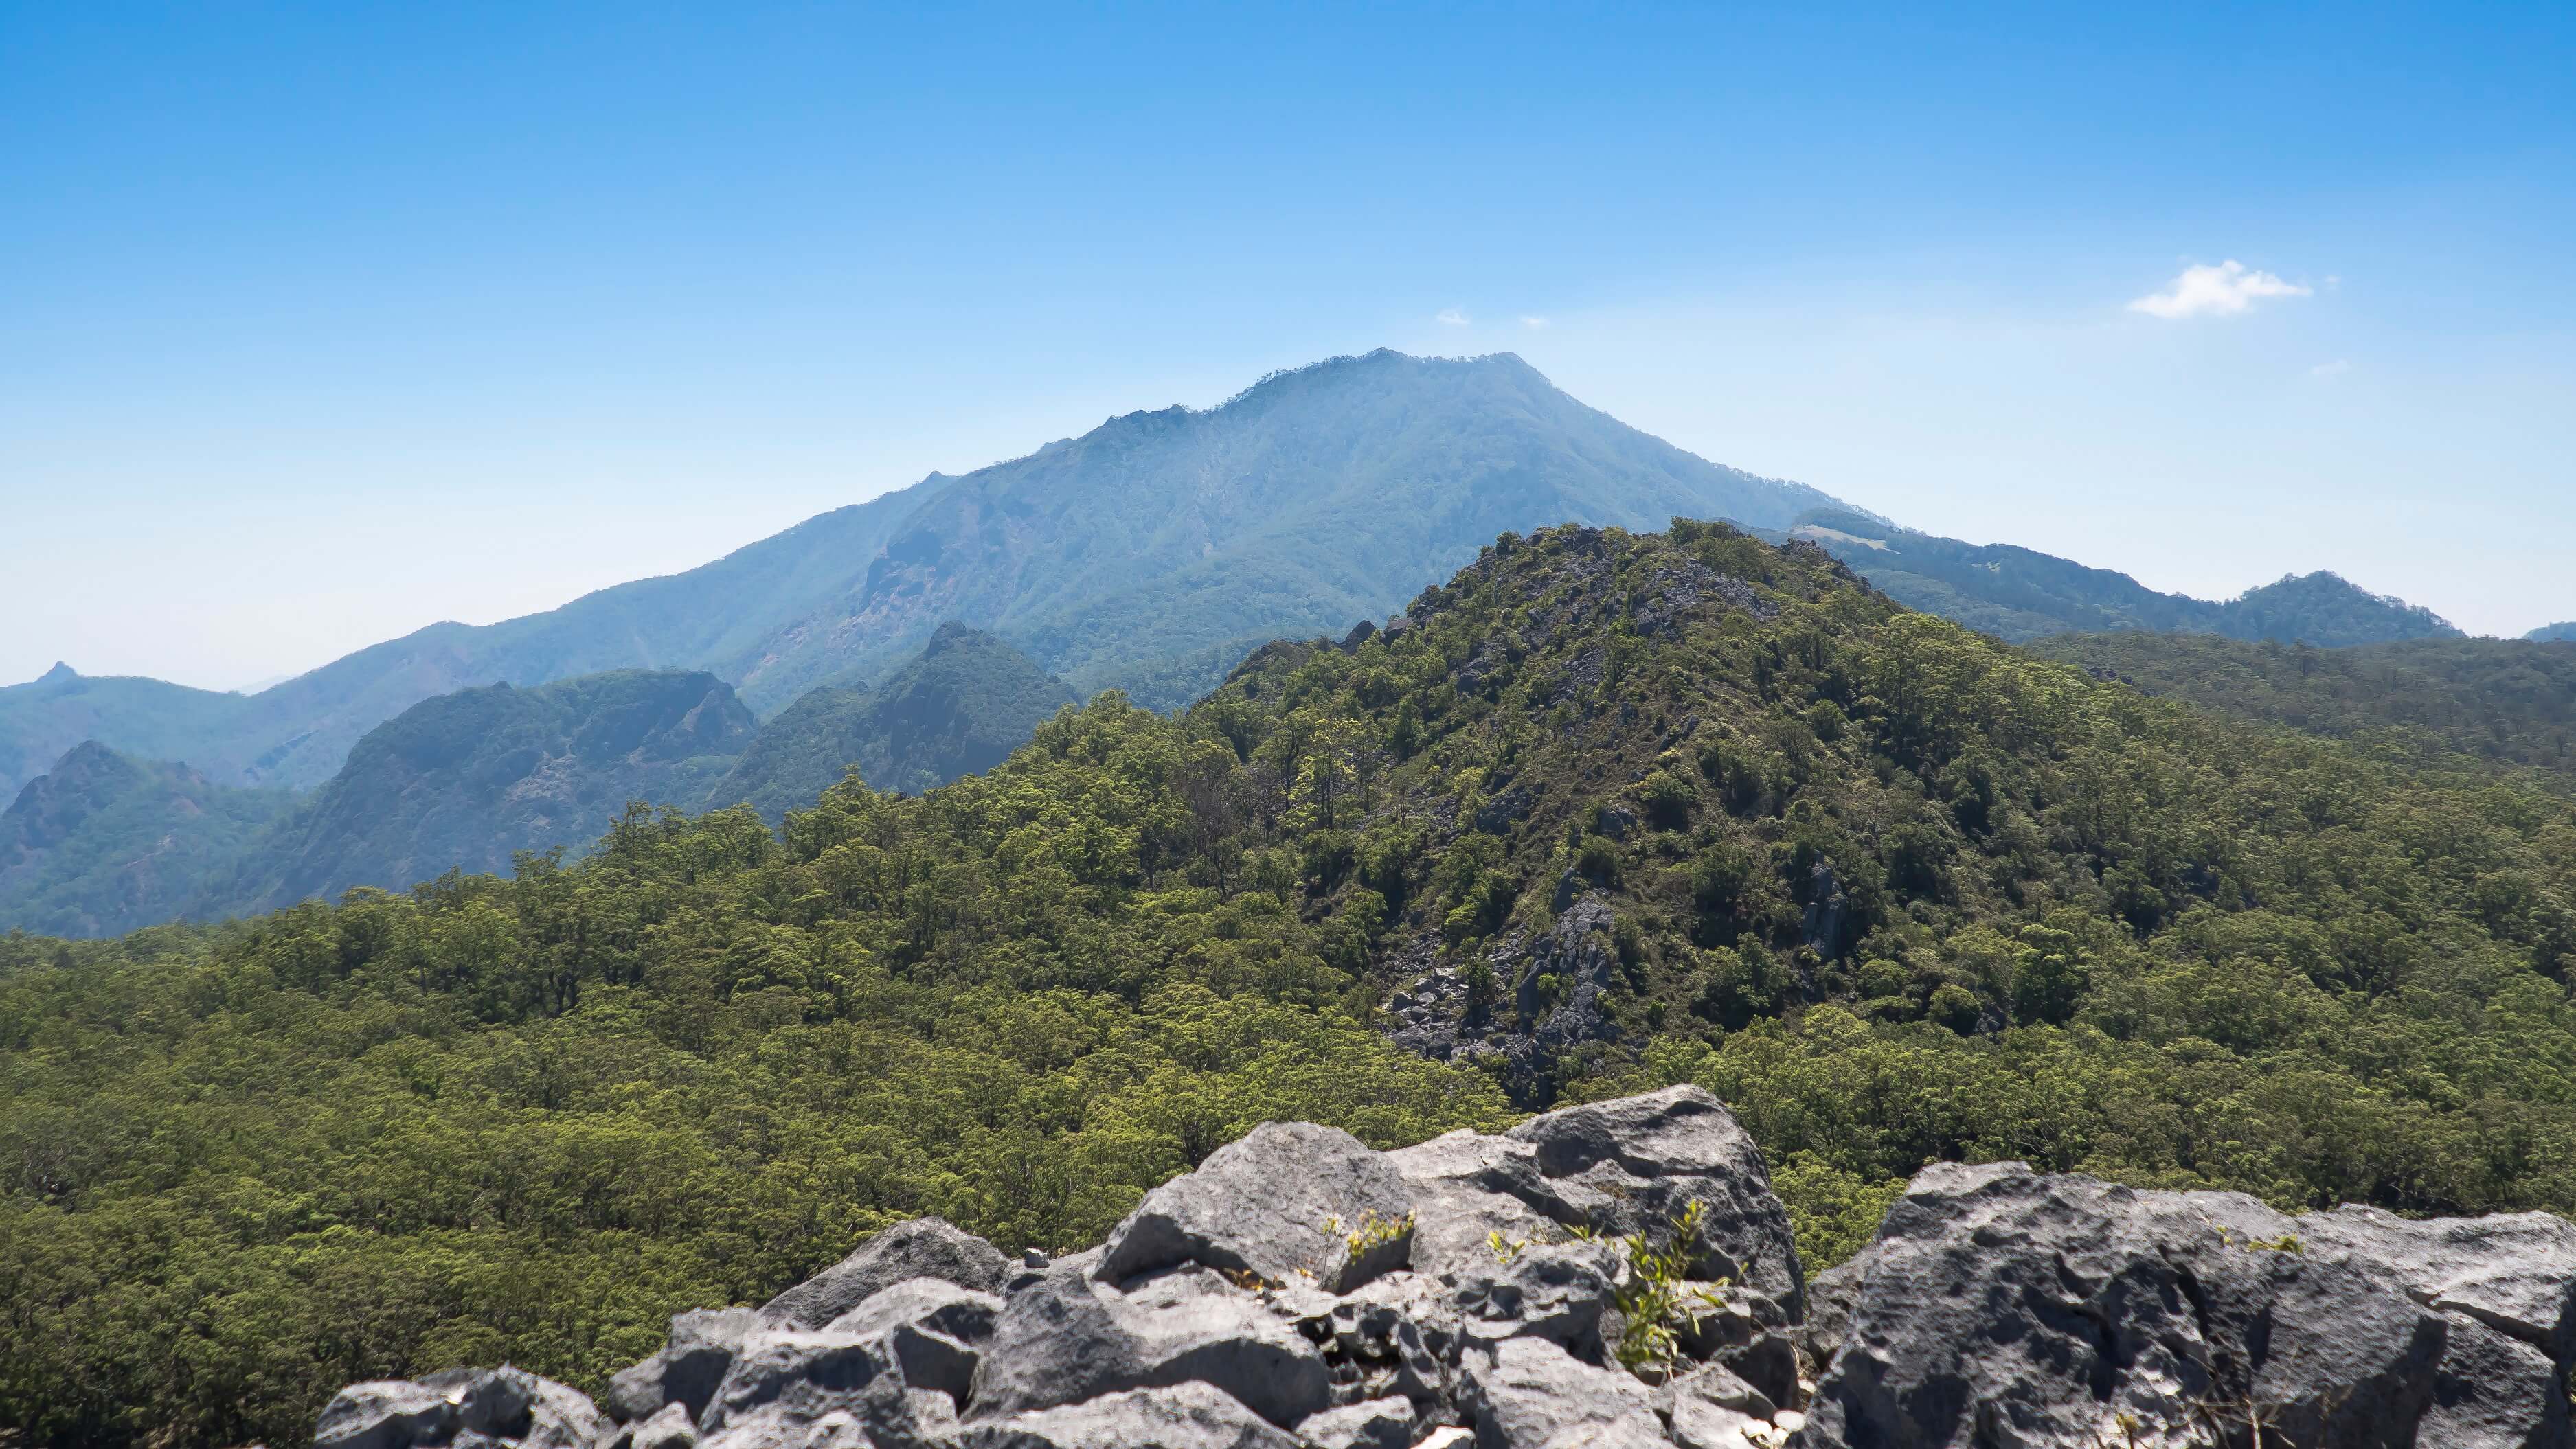 View of Mount Mutis from Benteng Oenino, a rock hill that was believed to serve as a fortress in ancient Timorese wars. Orang Mollo inhabit the foothills of Mount Mutis, the source of four major Timorese rivers. Photo by Andra Fembriarto